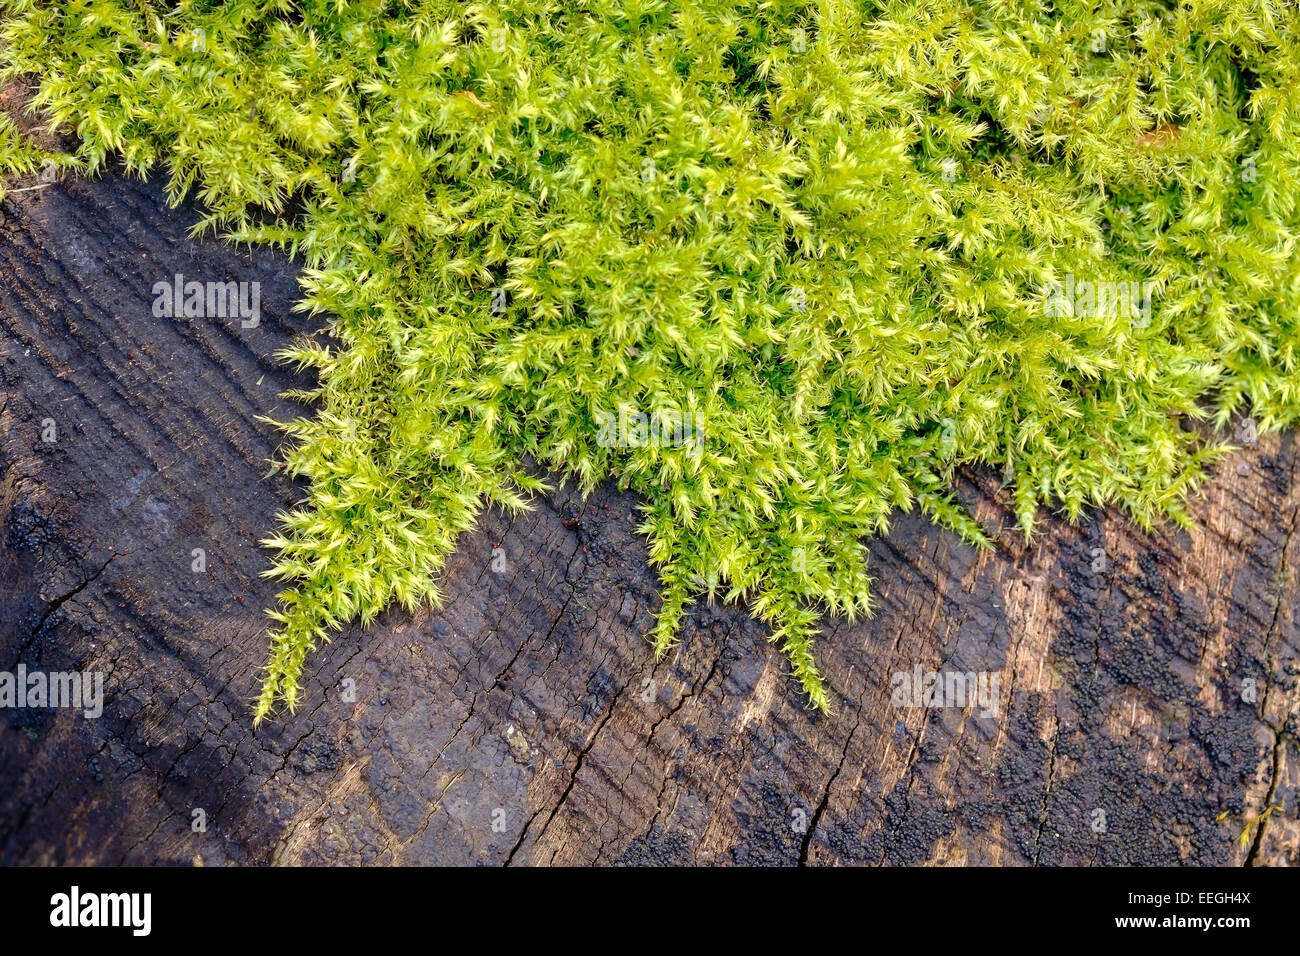 Green sphagnum moss growing over a an old tree stump in a Scottish woodland. Stock Photo